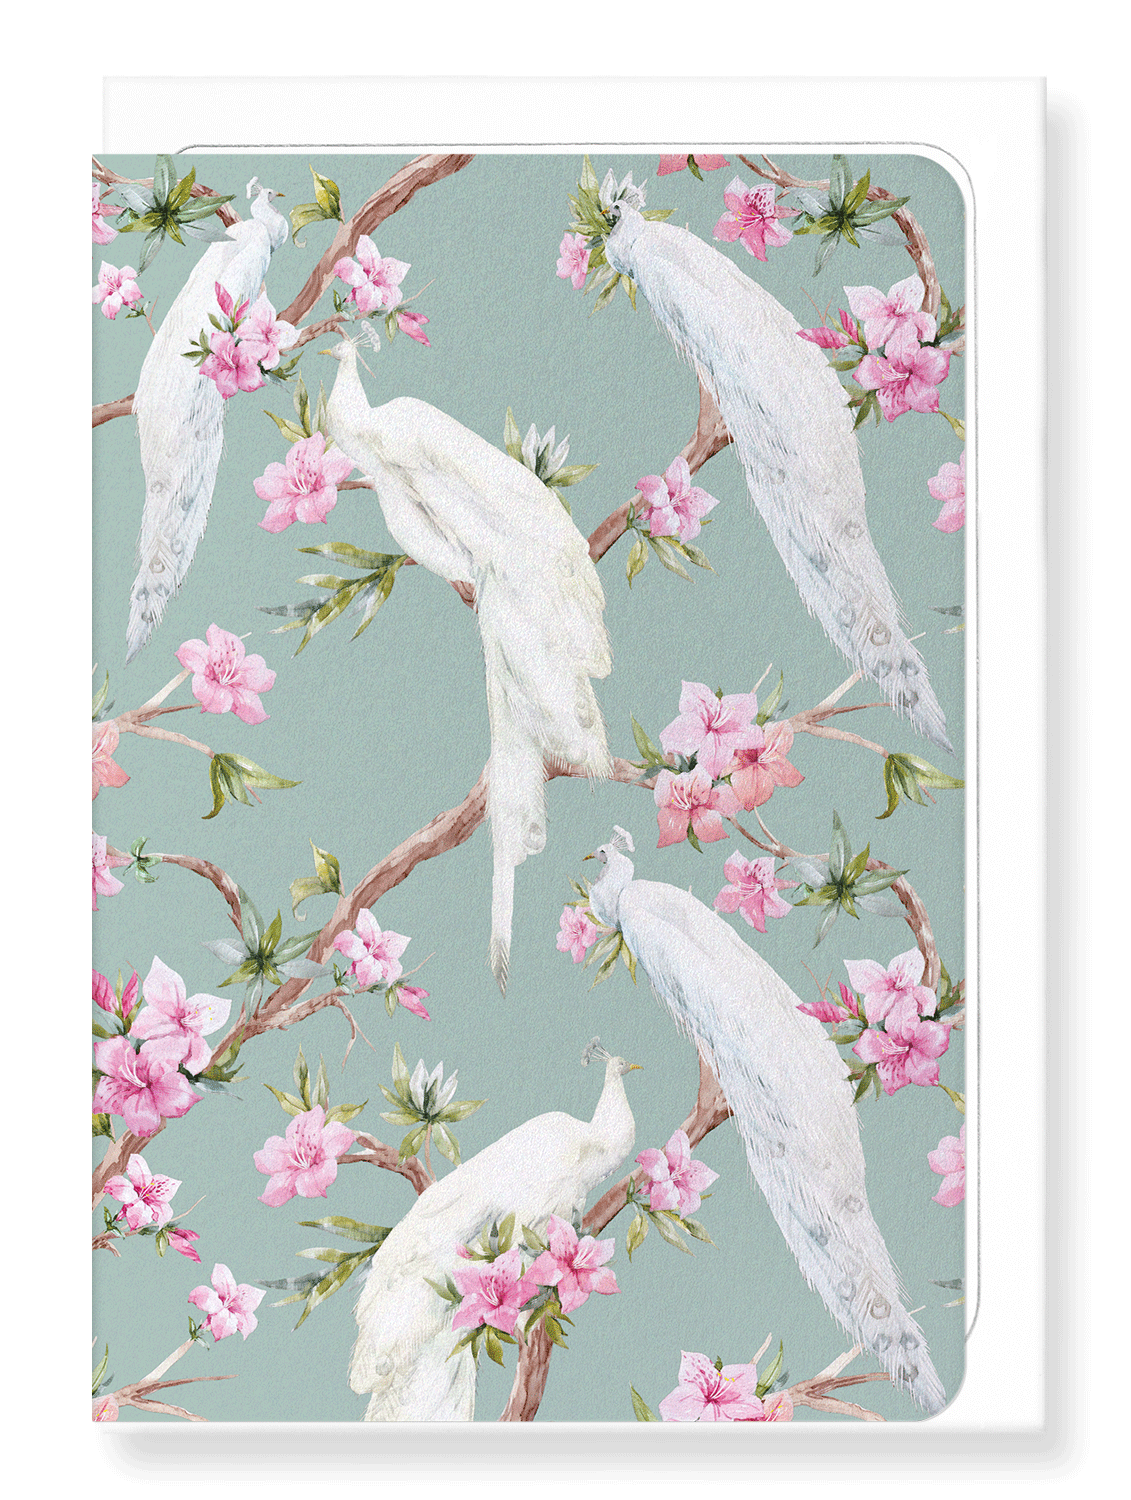 Ezen Designs - White peacocks - Greeting Card - Front